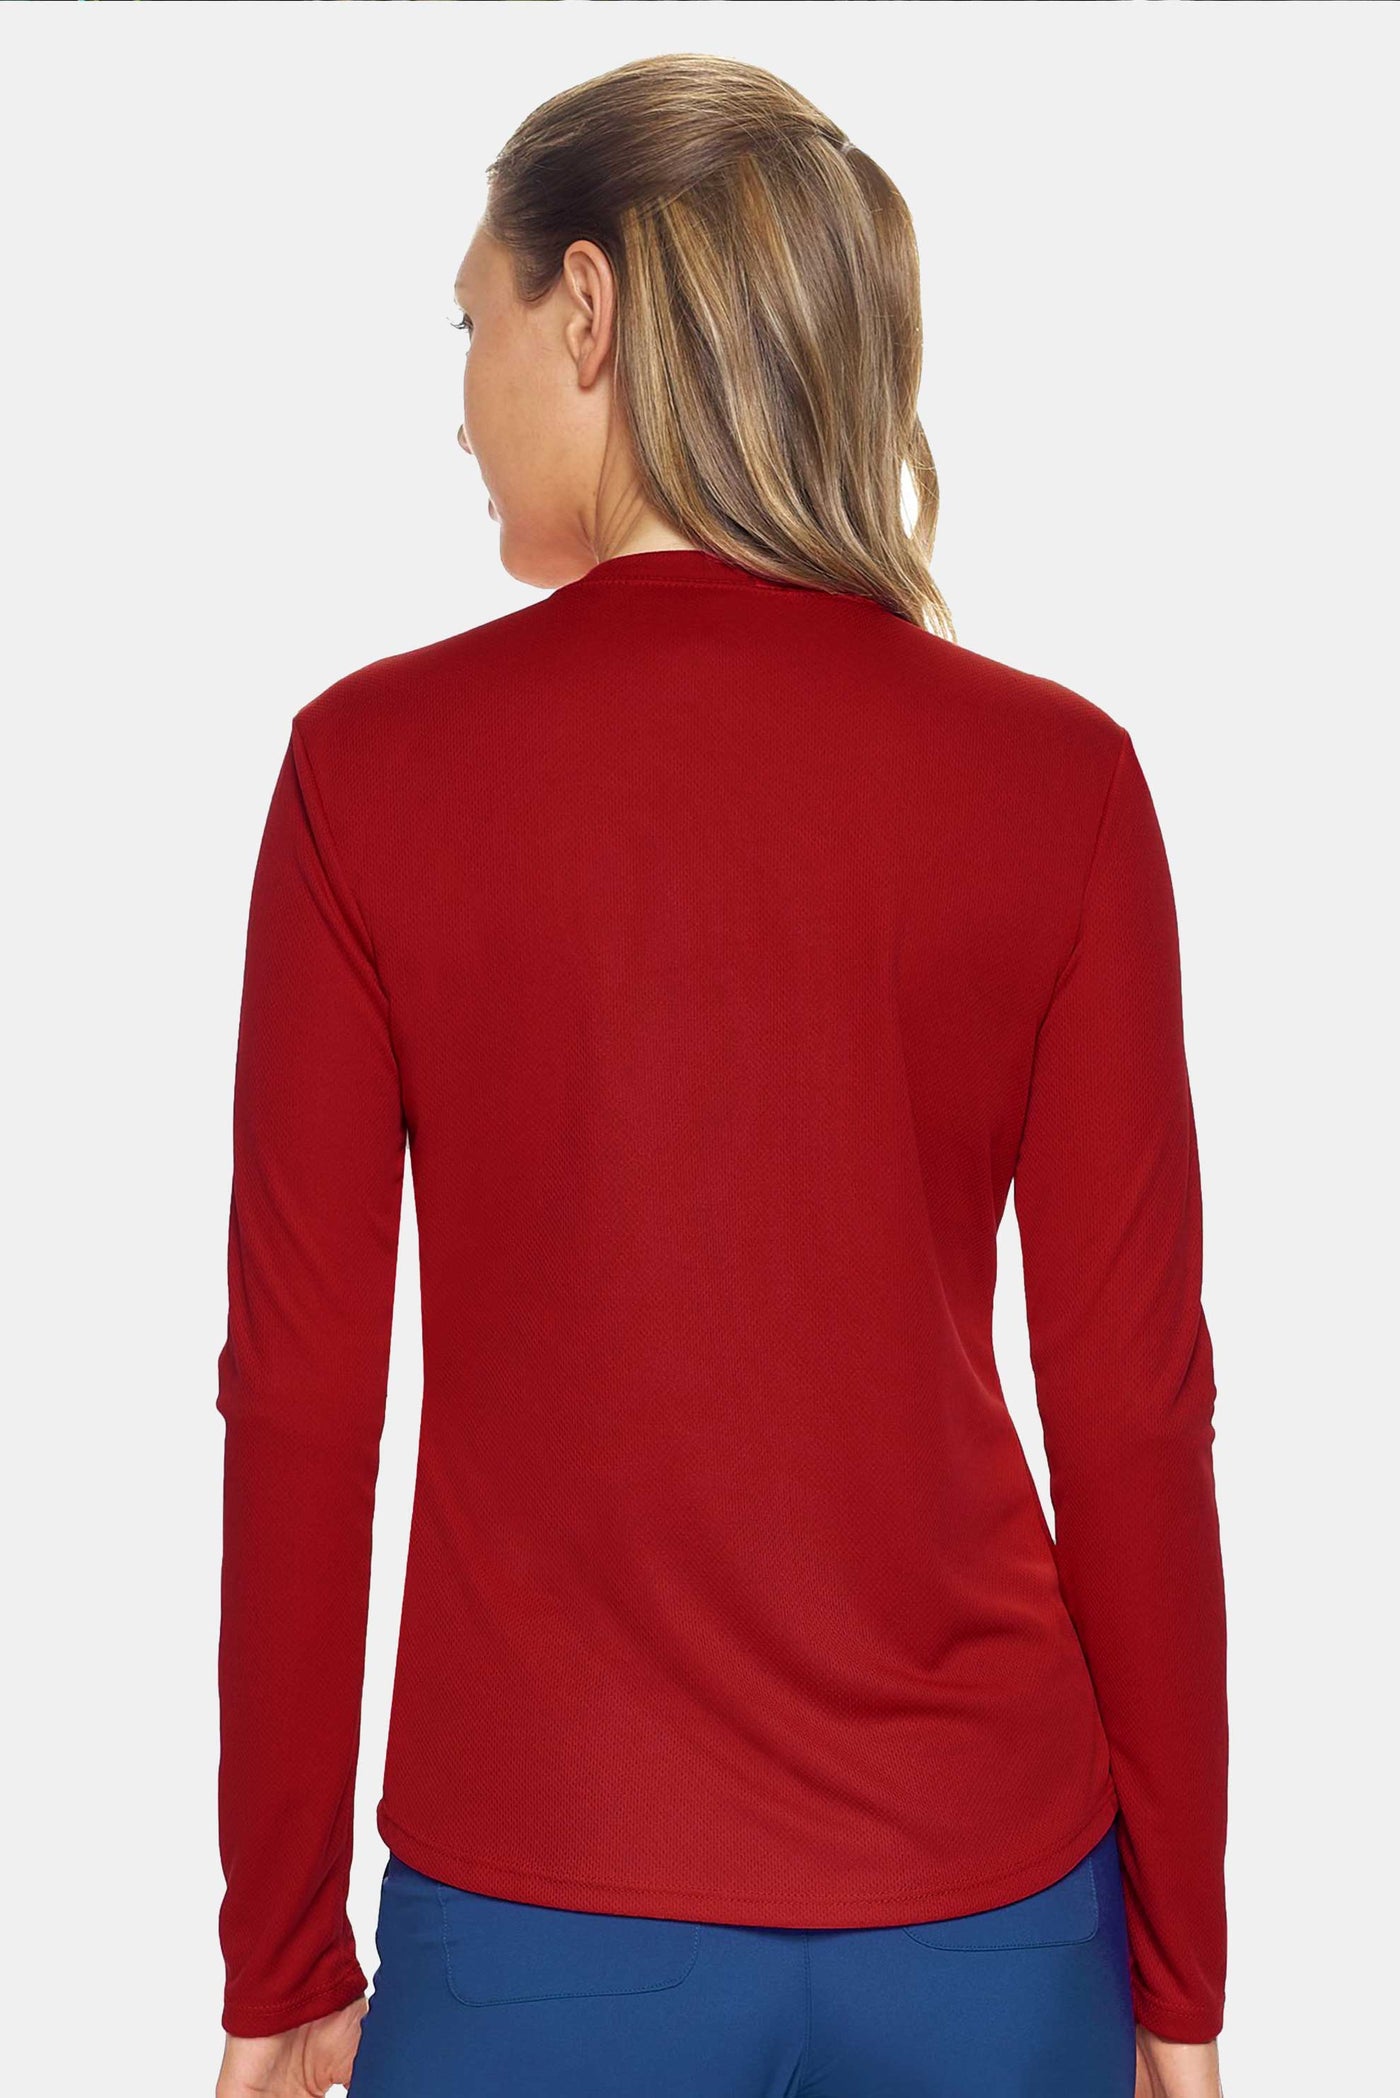 Expert Brand Apparel Women's Oxymesh Crewneck Long Sleeve Tech Tee Made in USA AJ301D True Red image 3#color_true-red